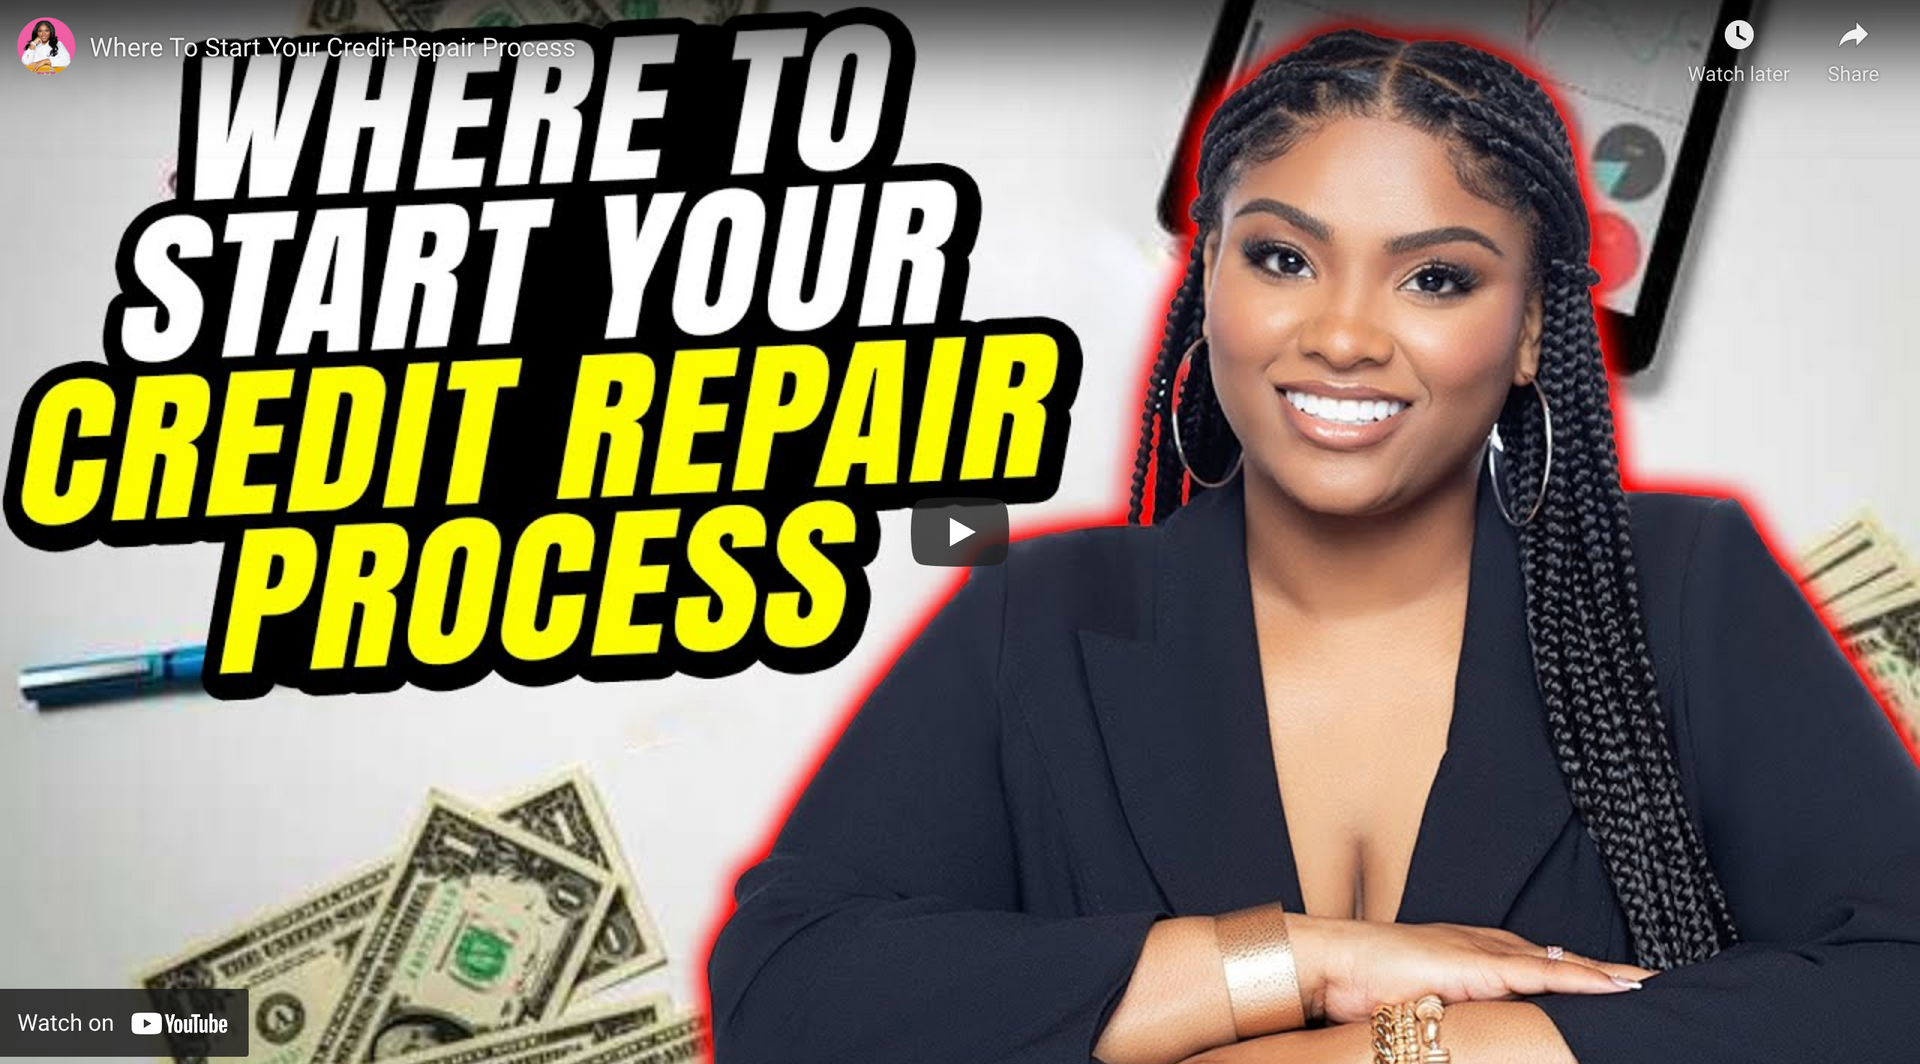 Load video: Where To Start Your Credit Repair Process